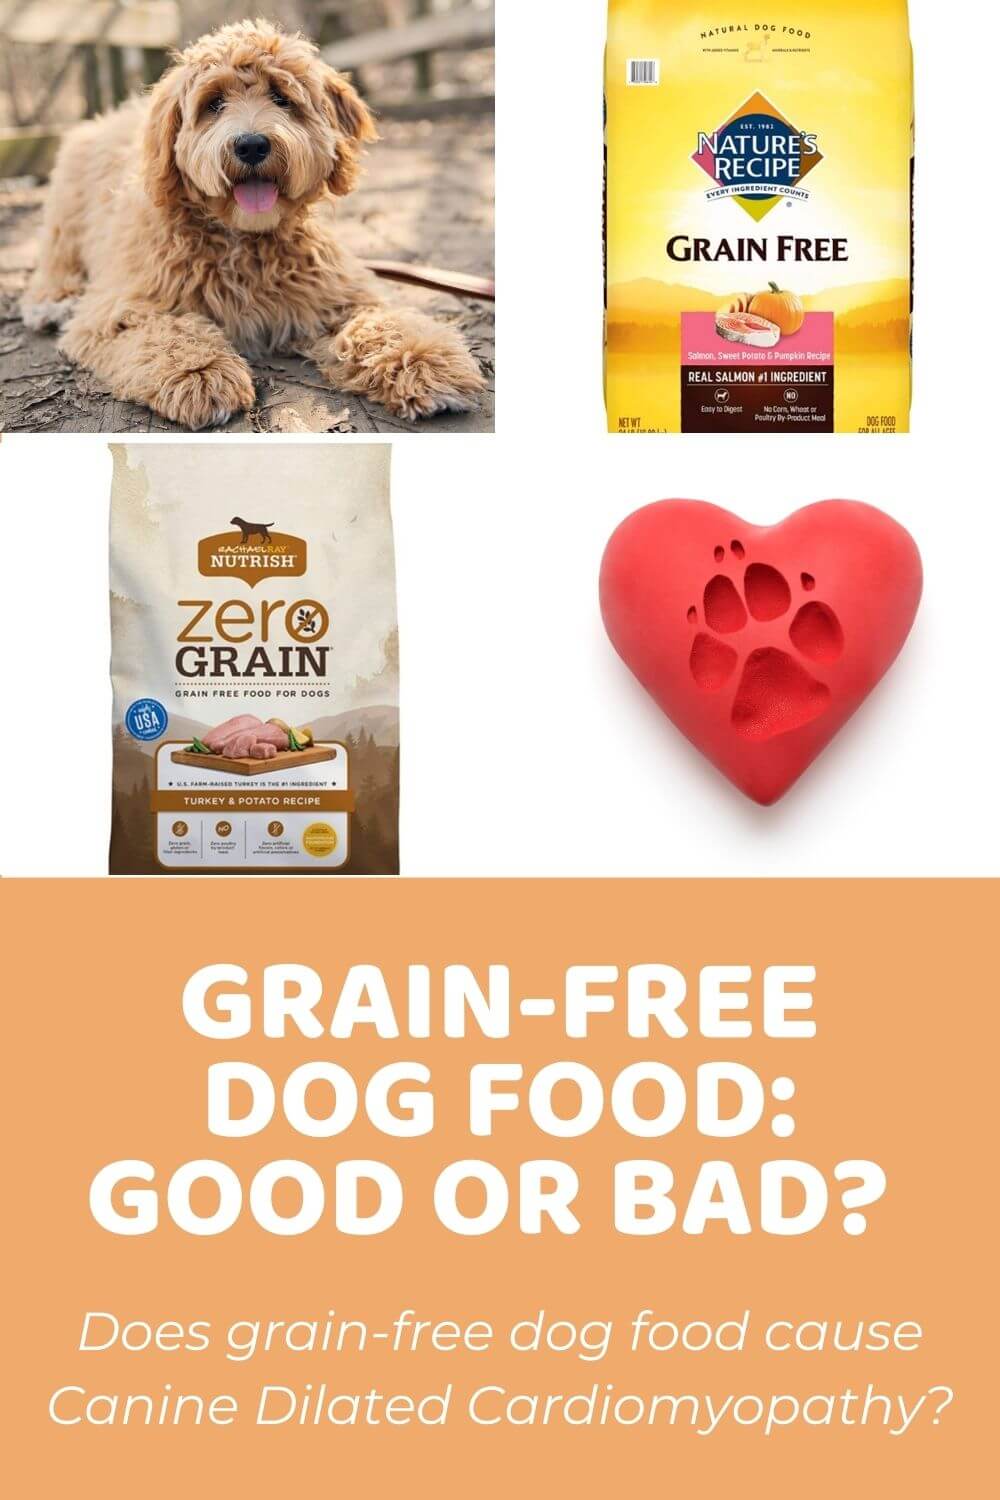 Does Authority Dog Food Have Grain